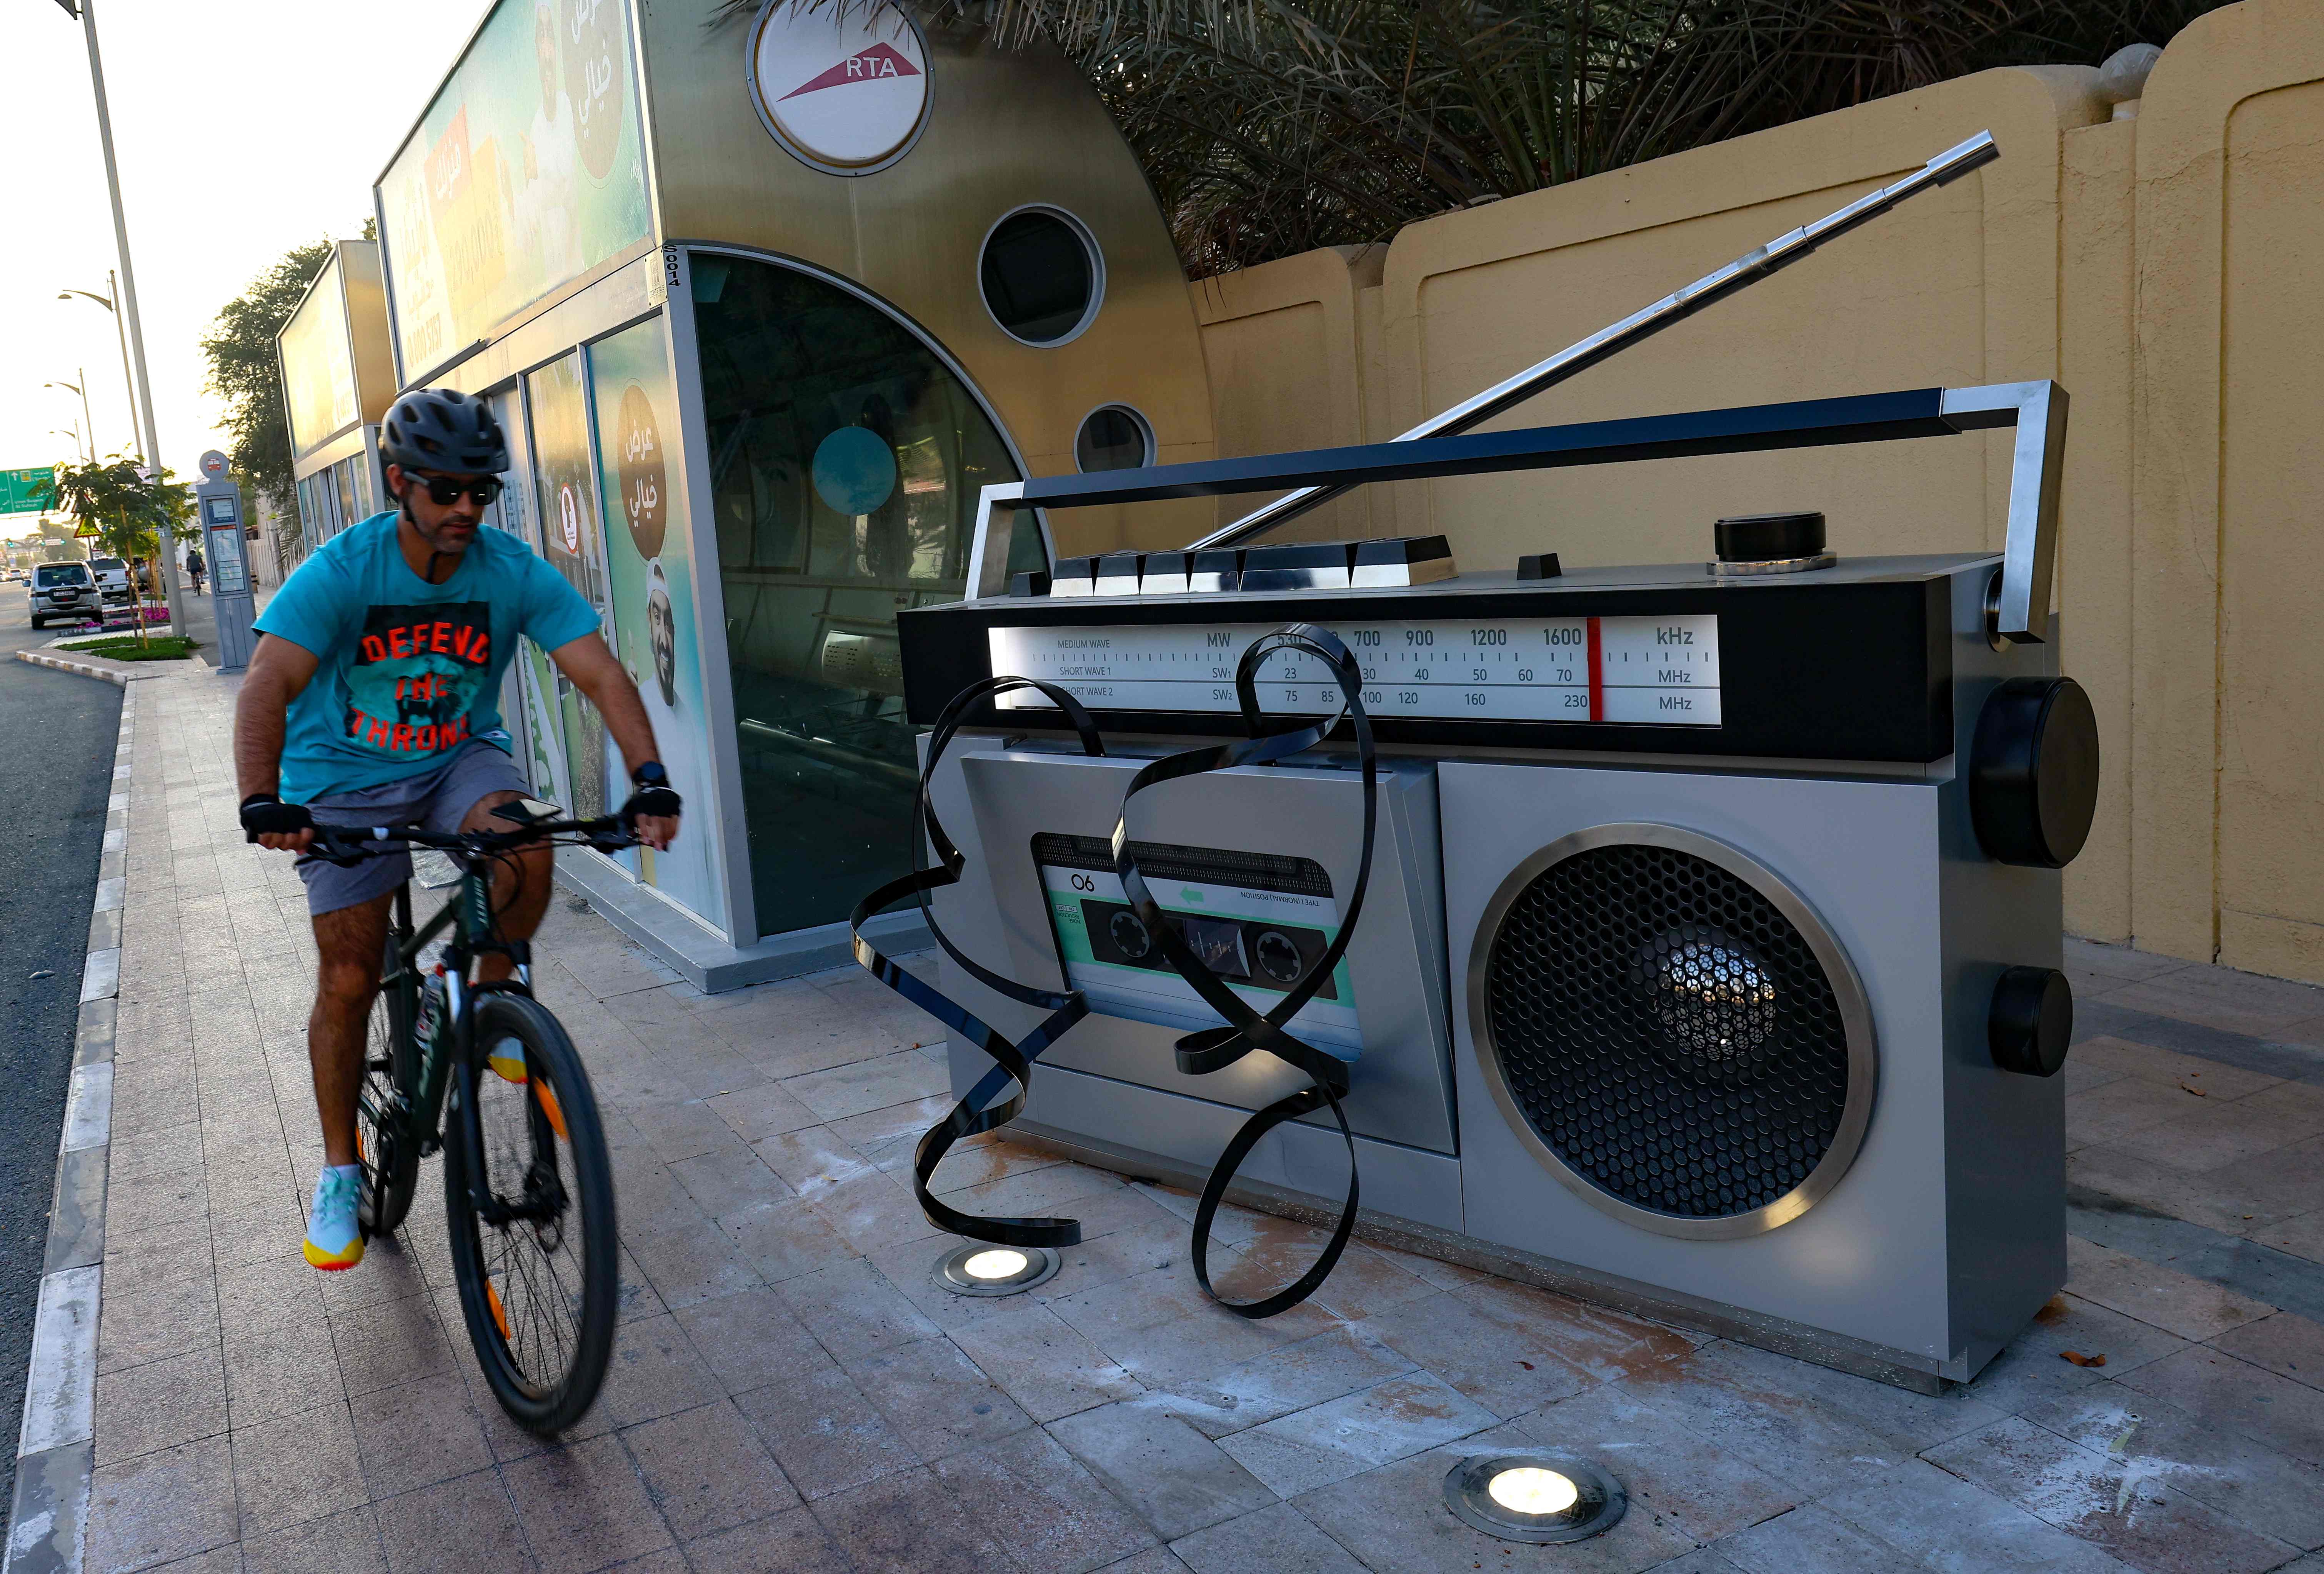 A man rides his bycycle past a giant sculpture representing an old radio-casette recorder on Jumaira street in the Gulf city of Dubai, on December 24, 2020. - The Emirate of Dubai has granted to Jumeirah street, one of its oldest and most popular, a new identity in an attempt to shed light on this vital street that testifies to the rapid development of the desert city. (Photo by GIUSEPPE CACACE / AFP)